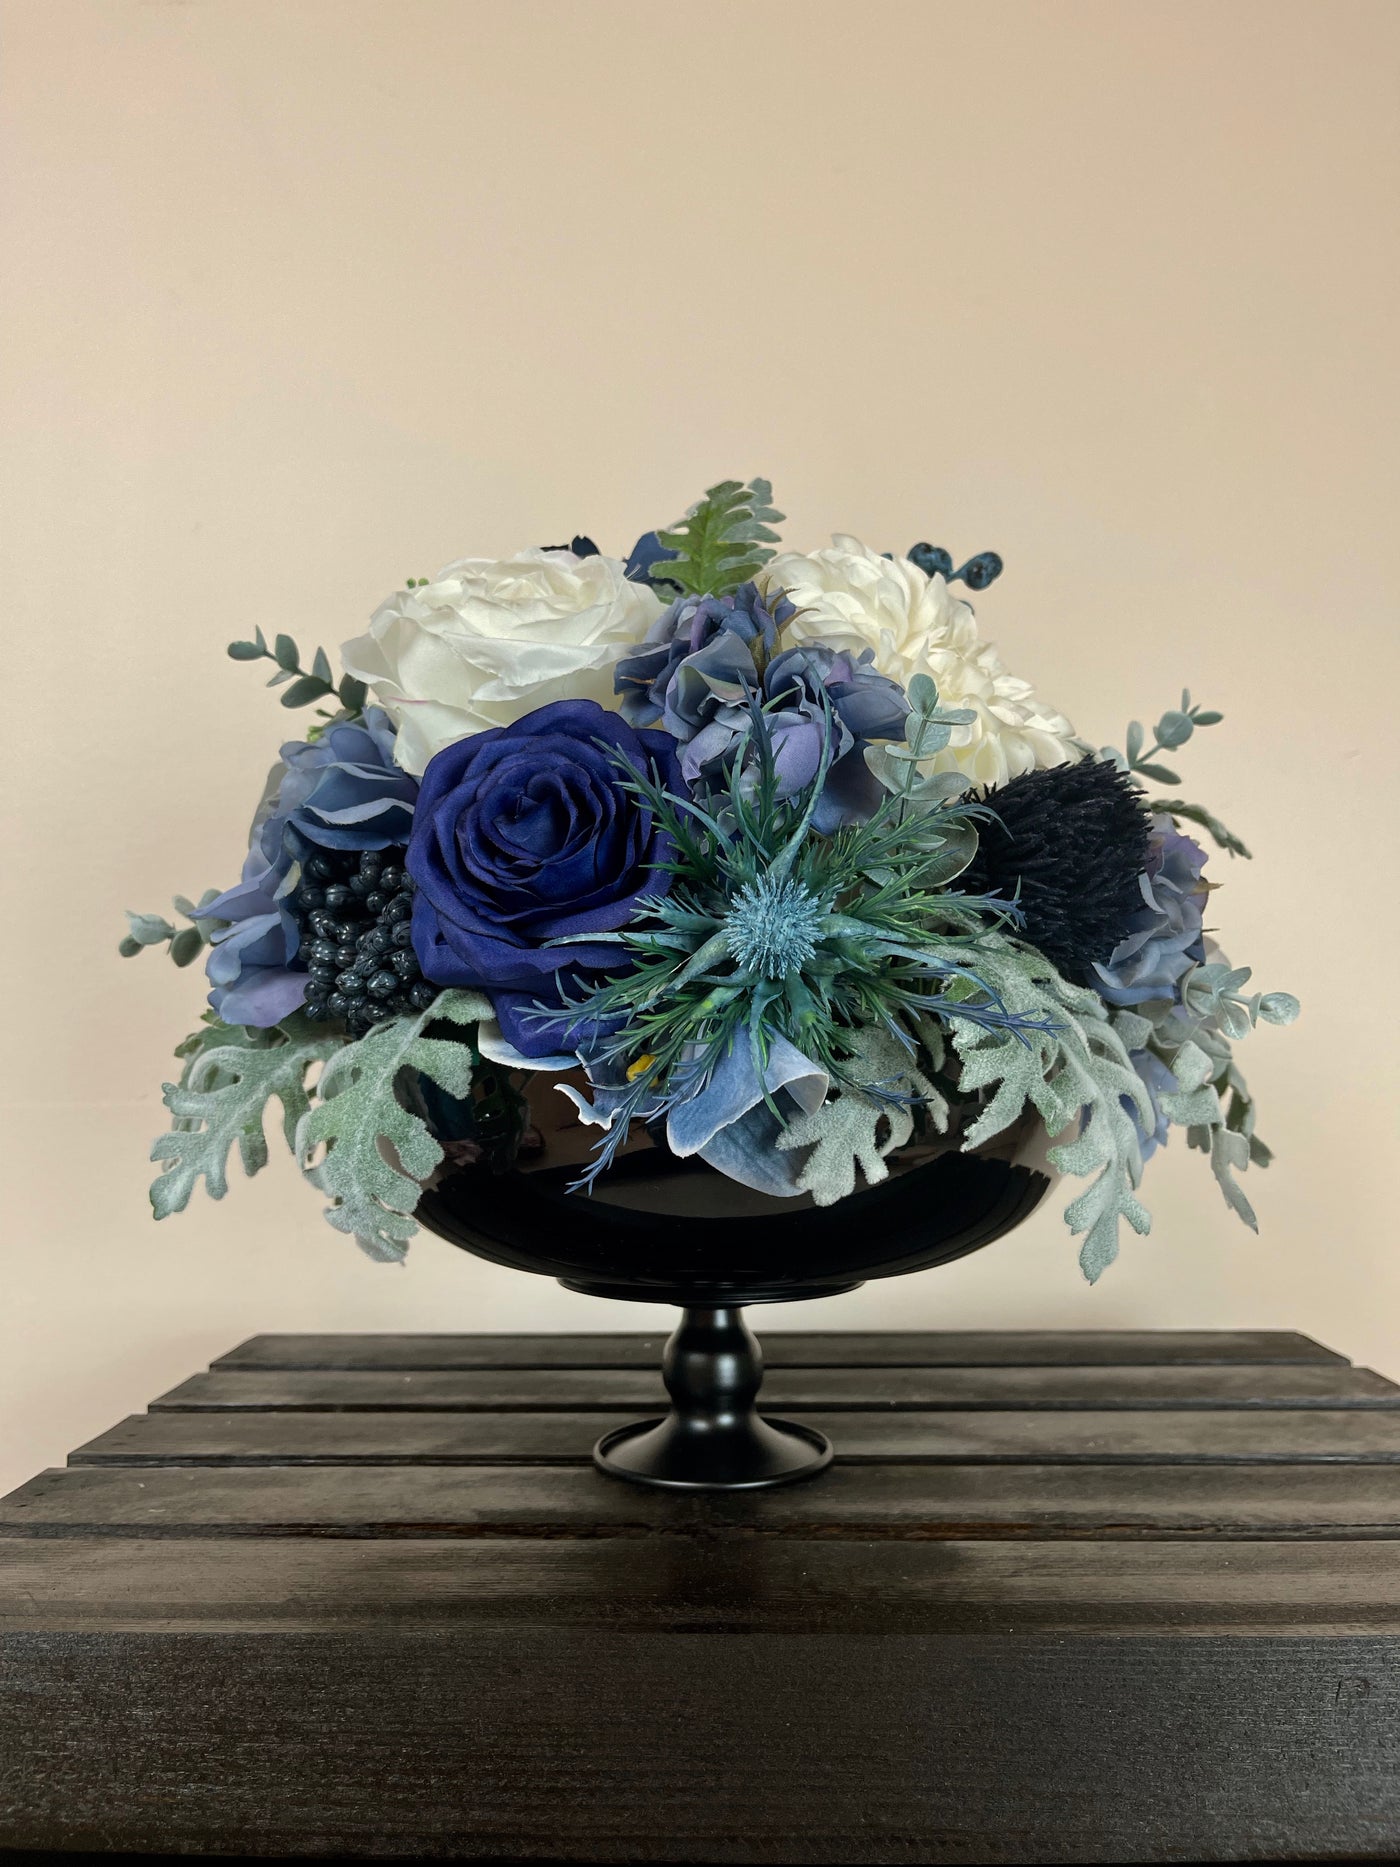 Rent A rose- Various shades of blue roses combined with white dahlias in a black pedestal vase - rent for five days for $40.00